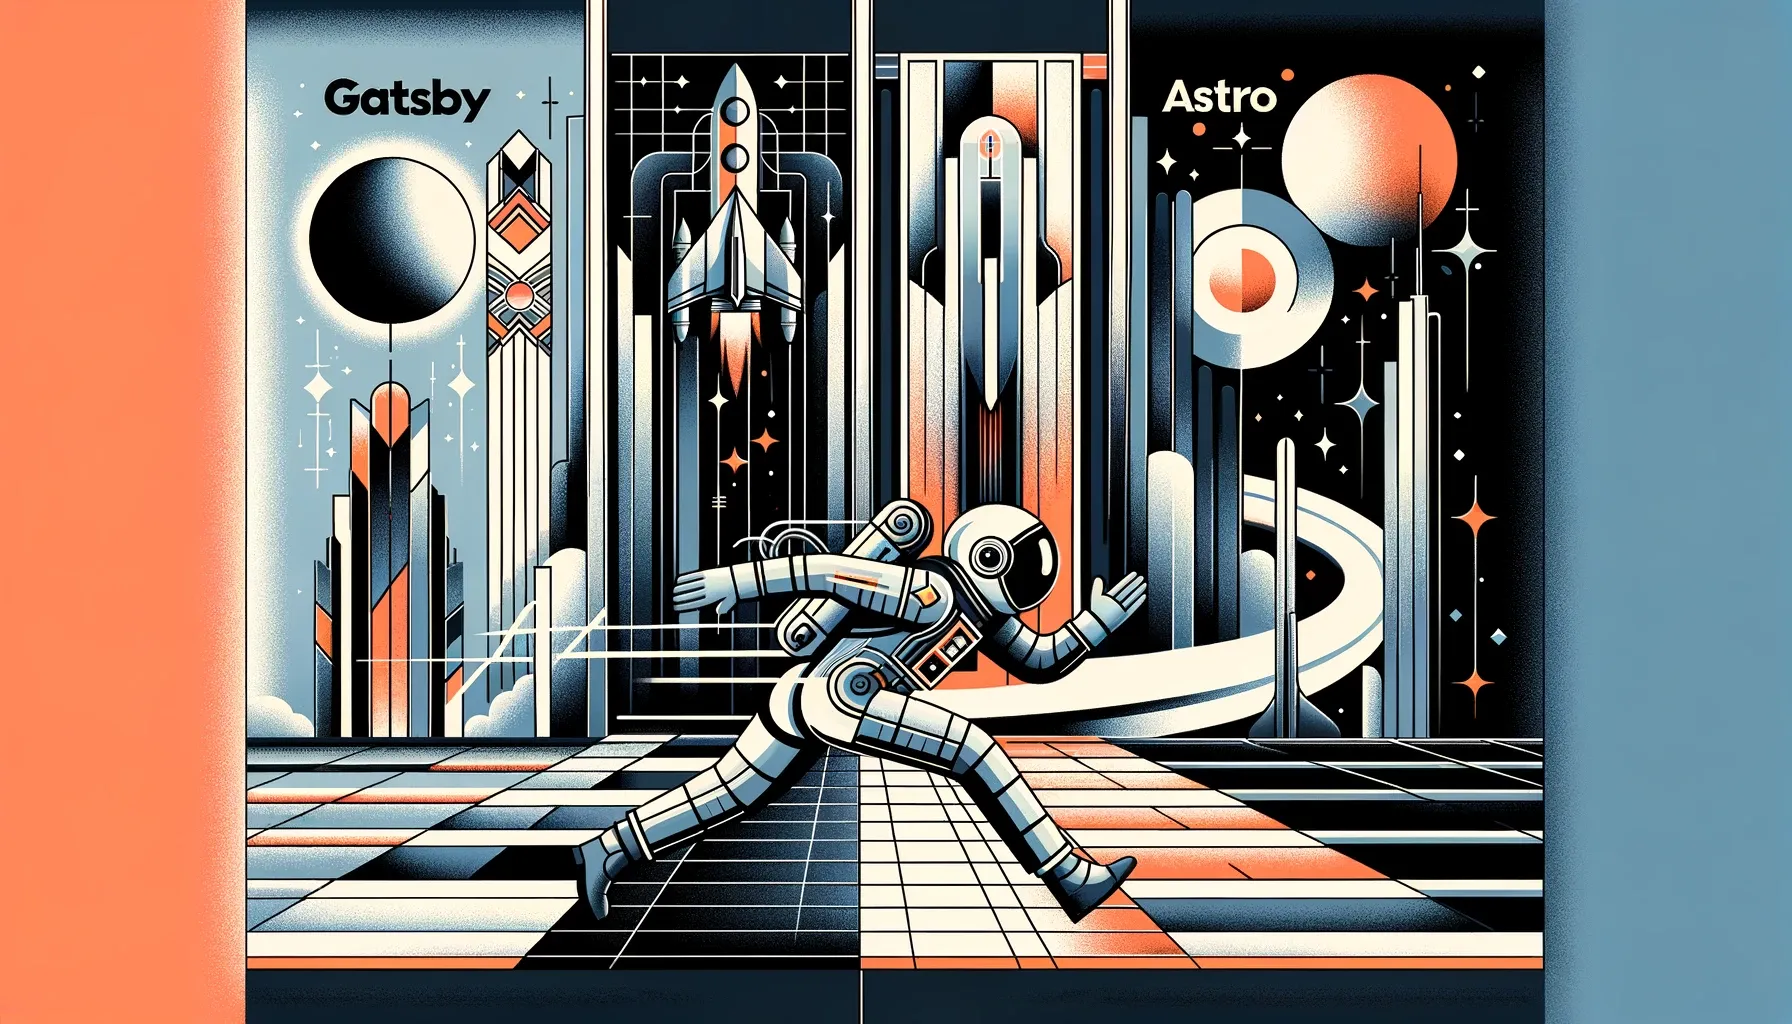 Astronaut sprinting from the land of Gatsby to the land of Astro